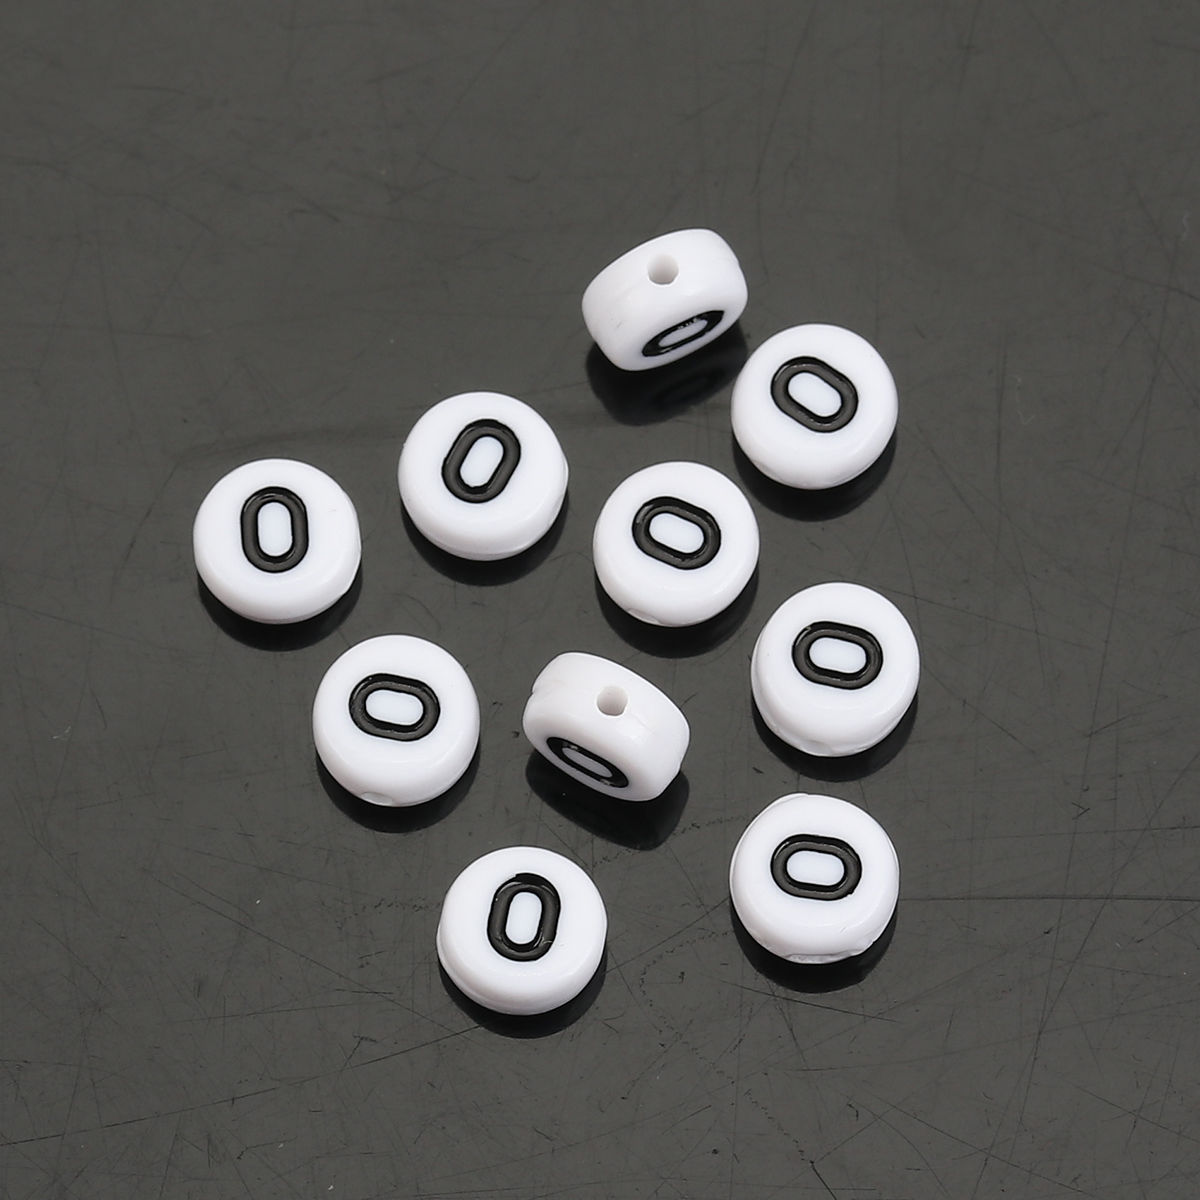 Picture of Acrylic Spacer Beads Flat Round White Alphabet/ Letter "O" About 7mm Dia, Hole: Approx 1mm, 500 PCs